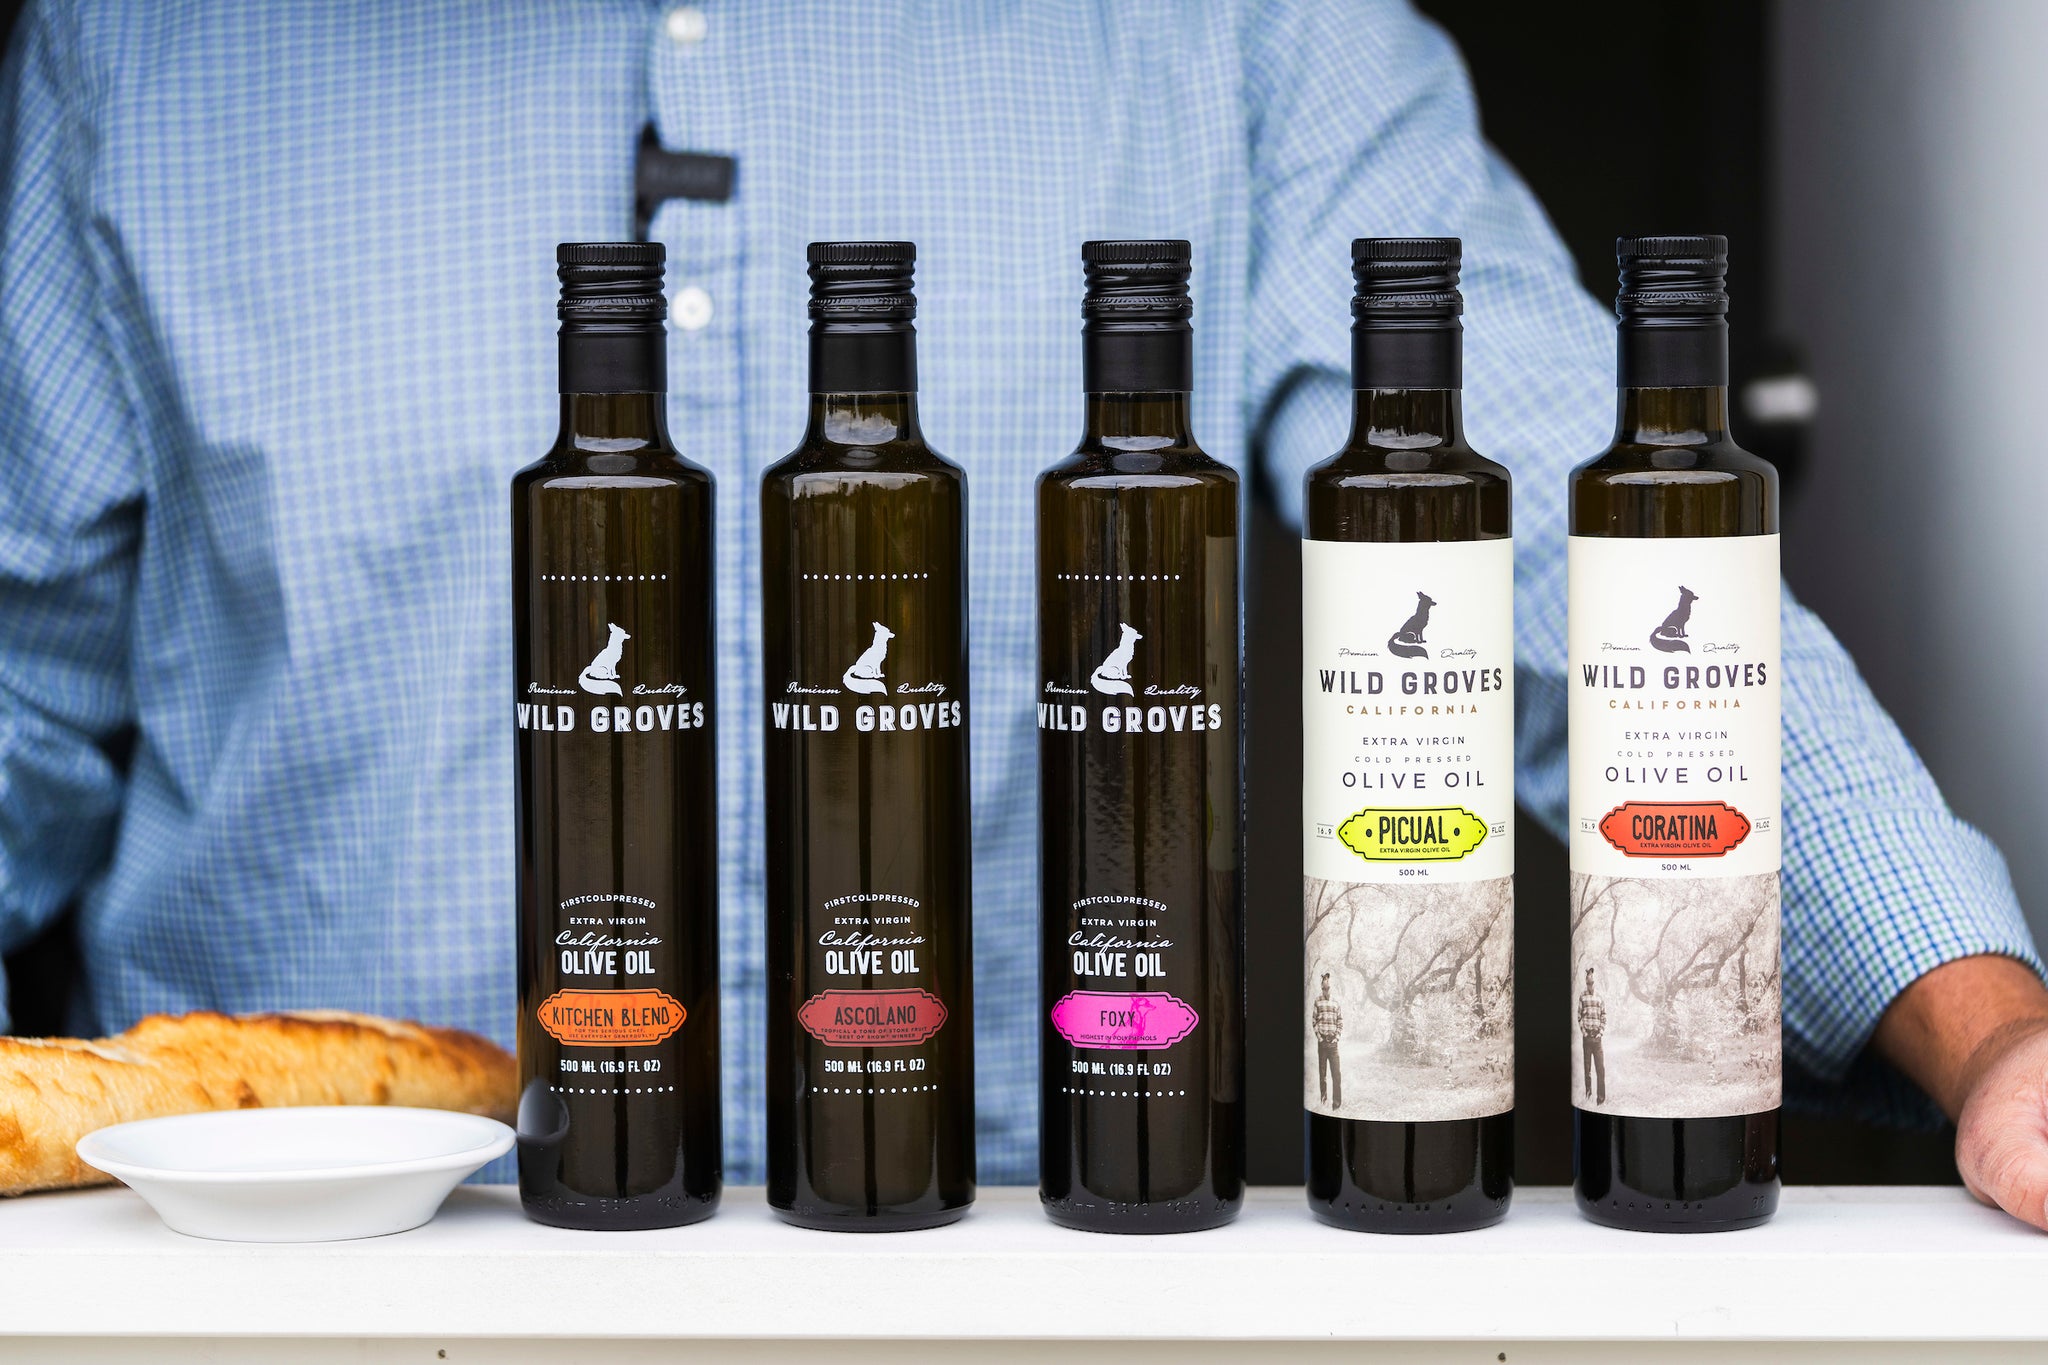 California olive oil and gourmet foods – Wild Groves